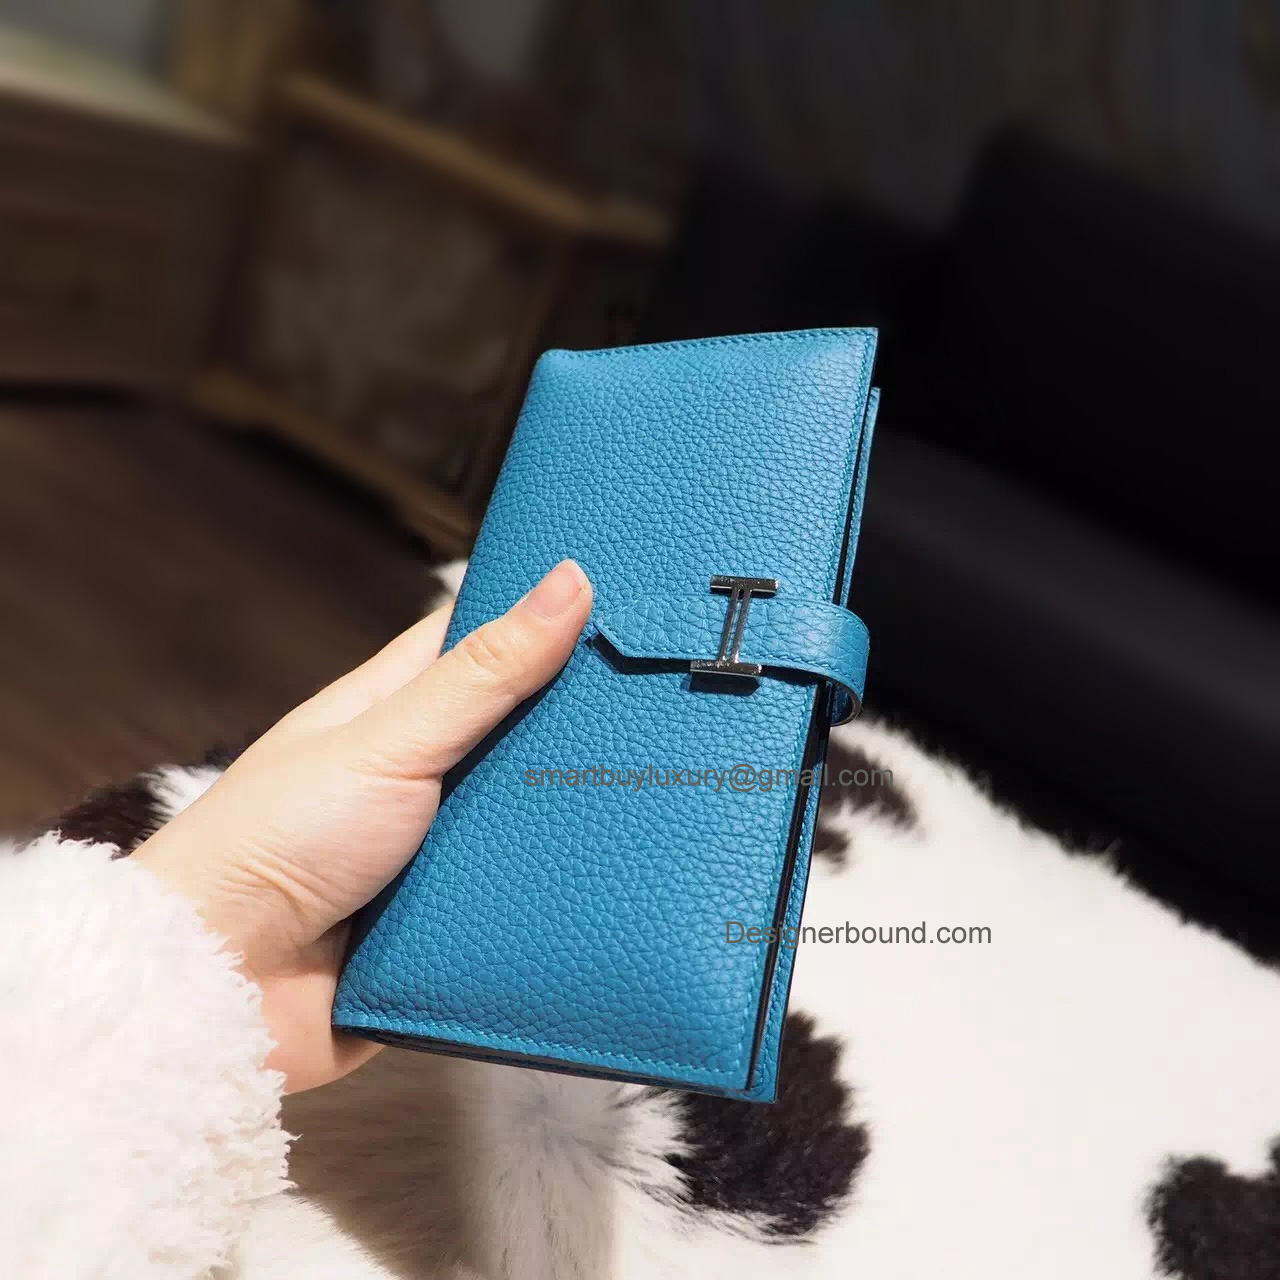 Replica Hermes Bearn Wallet Hand Stitched in 7b Turquoise Blue Togo Calfskin PHW